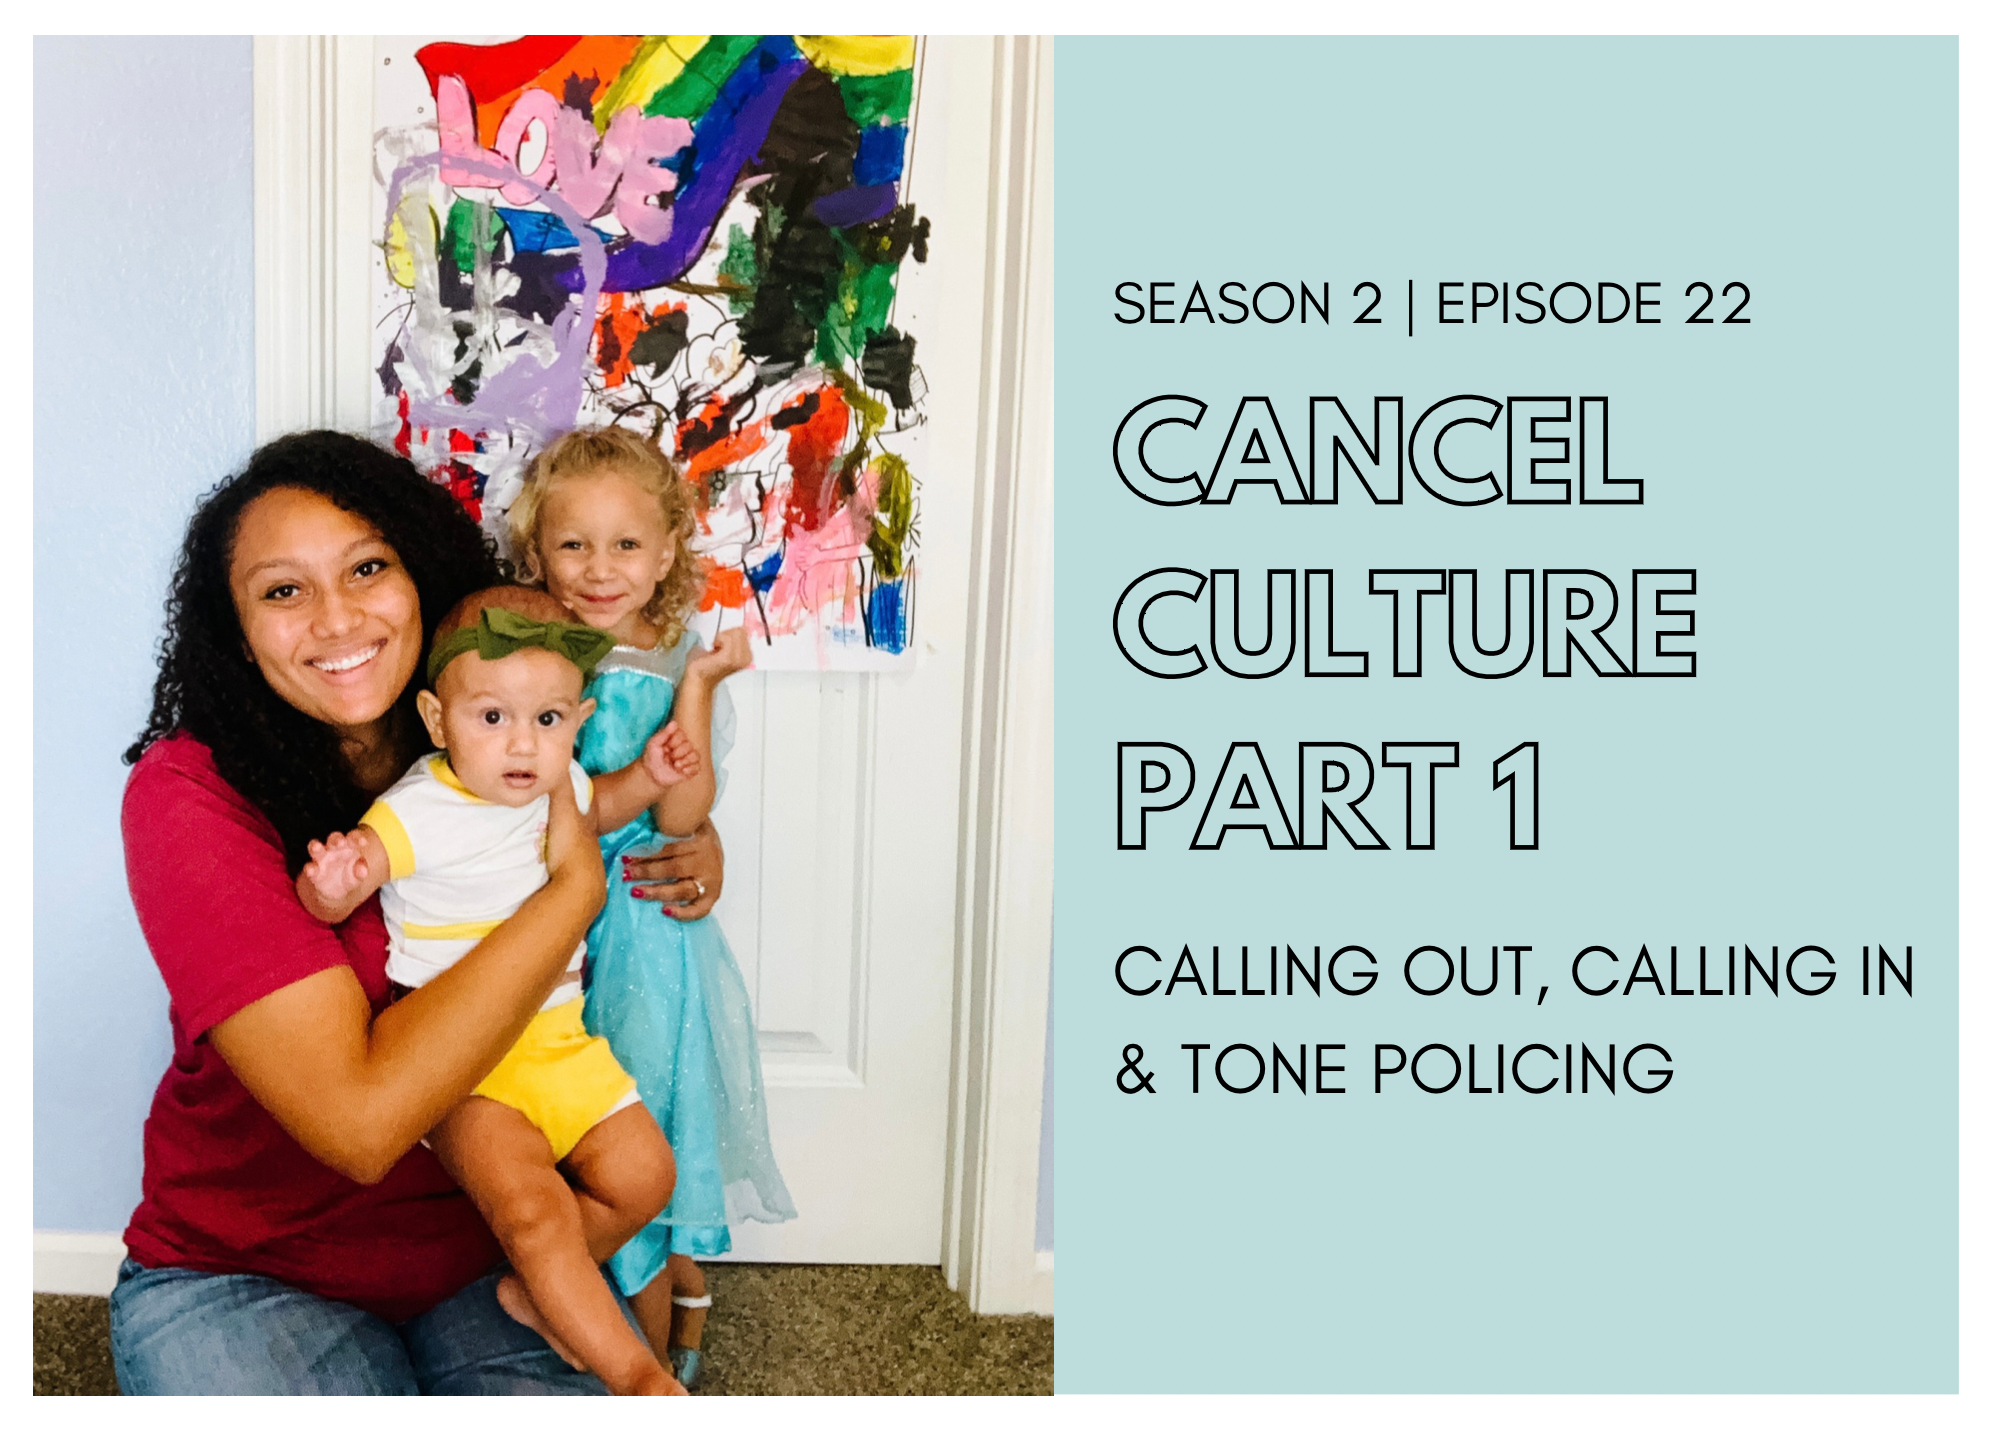 Cancel Culture Pt. 1: Calling Out, Calling In & Tone Policing